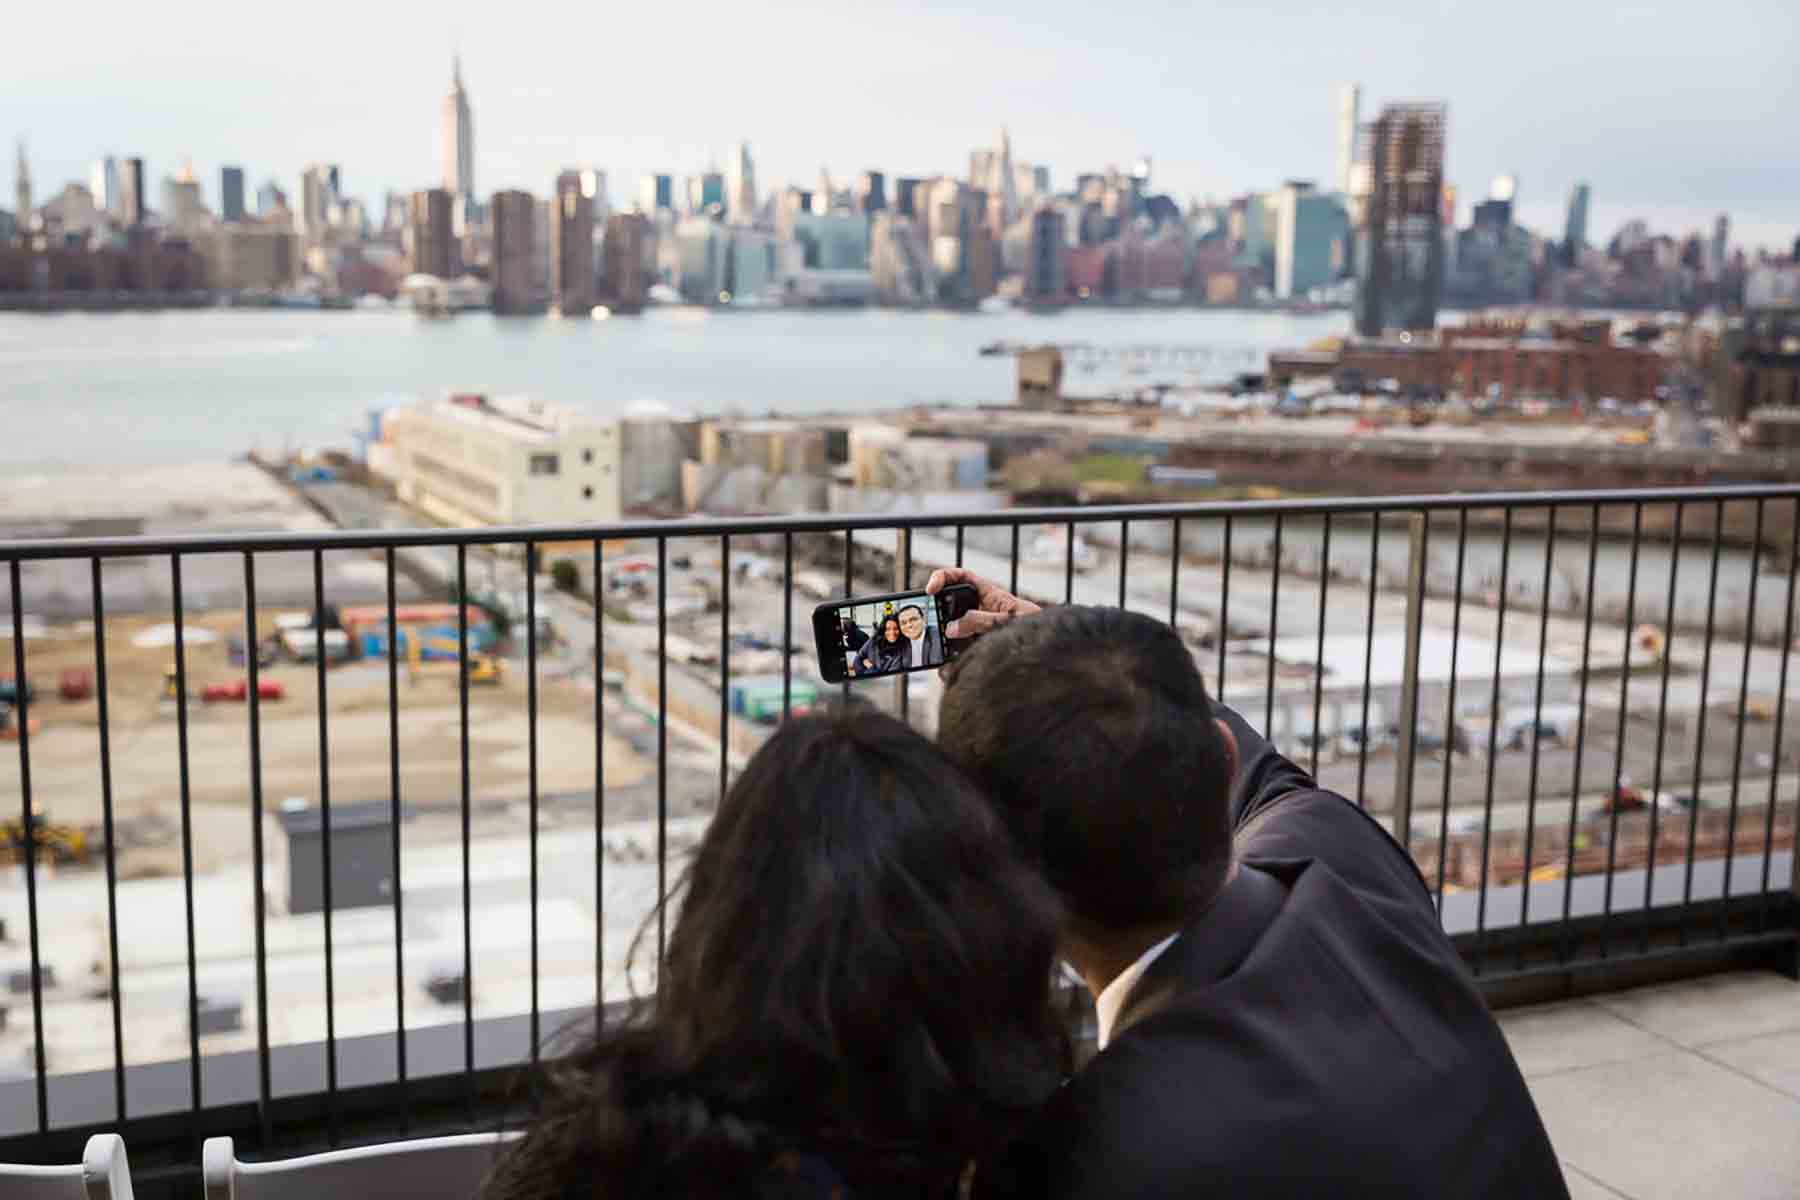 Couple taking selfie with NYC skyline in the background for an article on how to save money on wedding photography